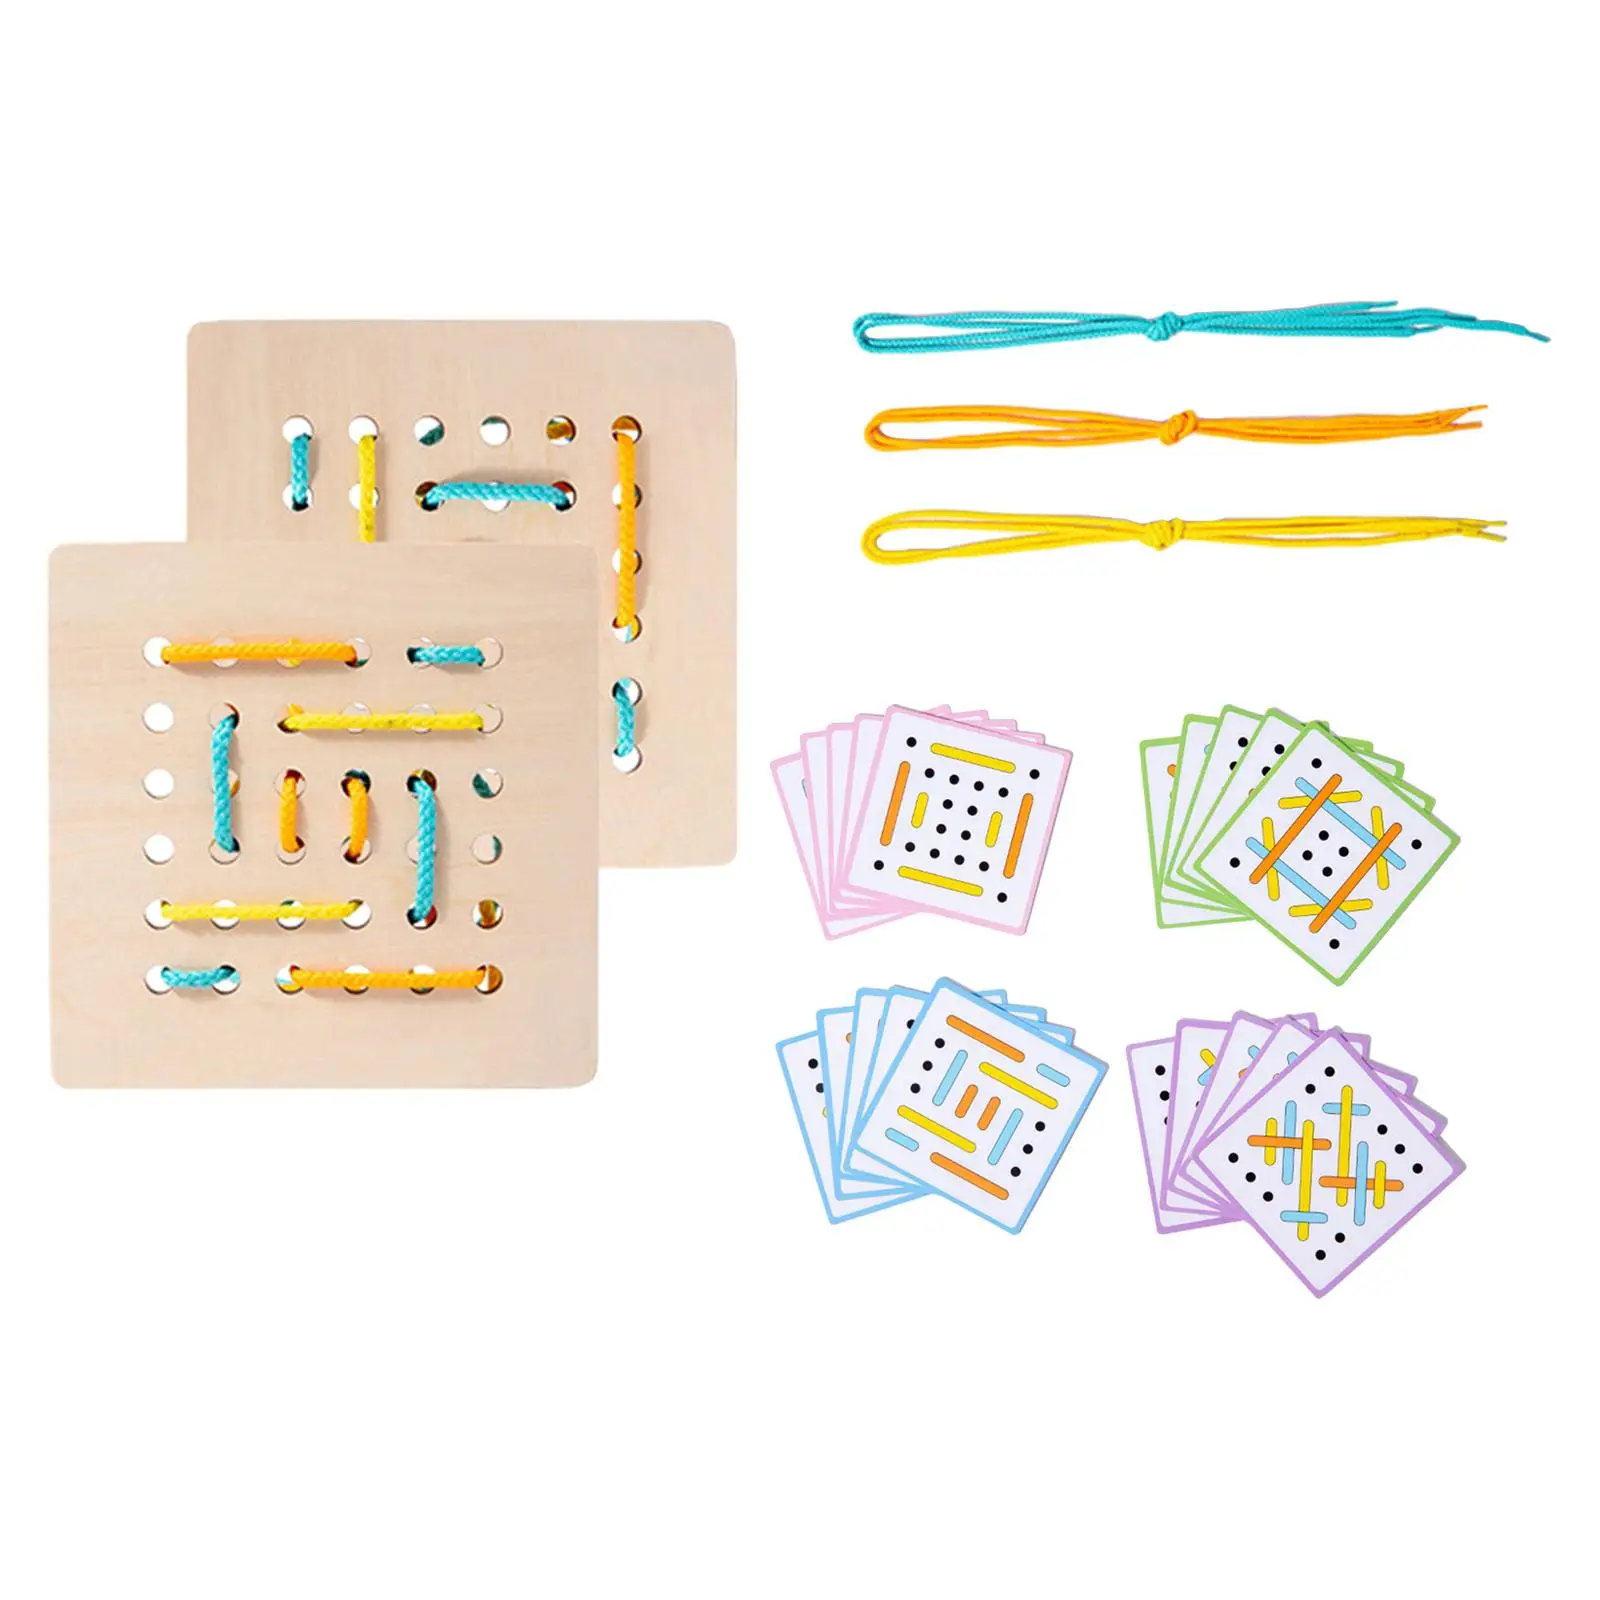 

Rope Threading Game Learning Preschool Learning Kids Valentines Gifts for Kids Boy and Girls Birthday Gift Age 3 4 5 6 Children